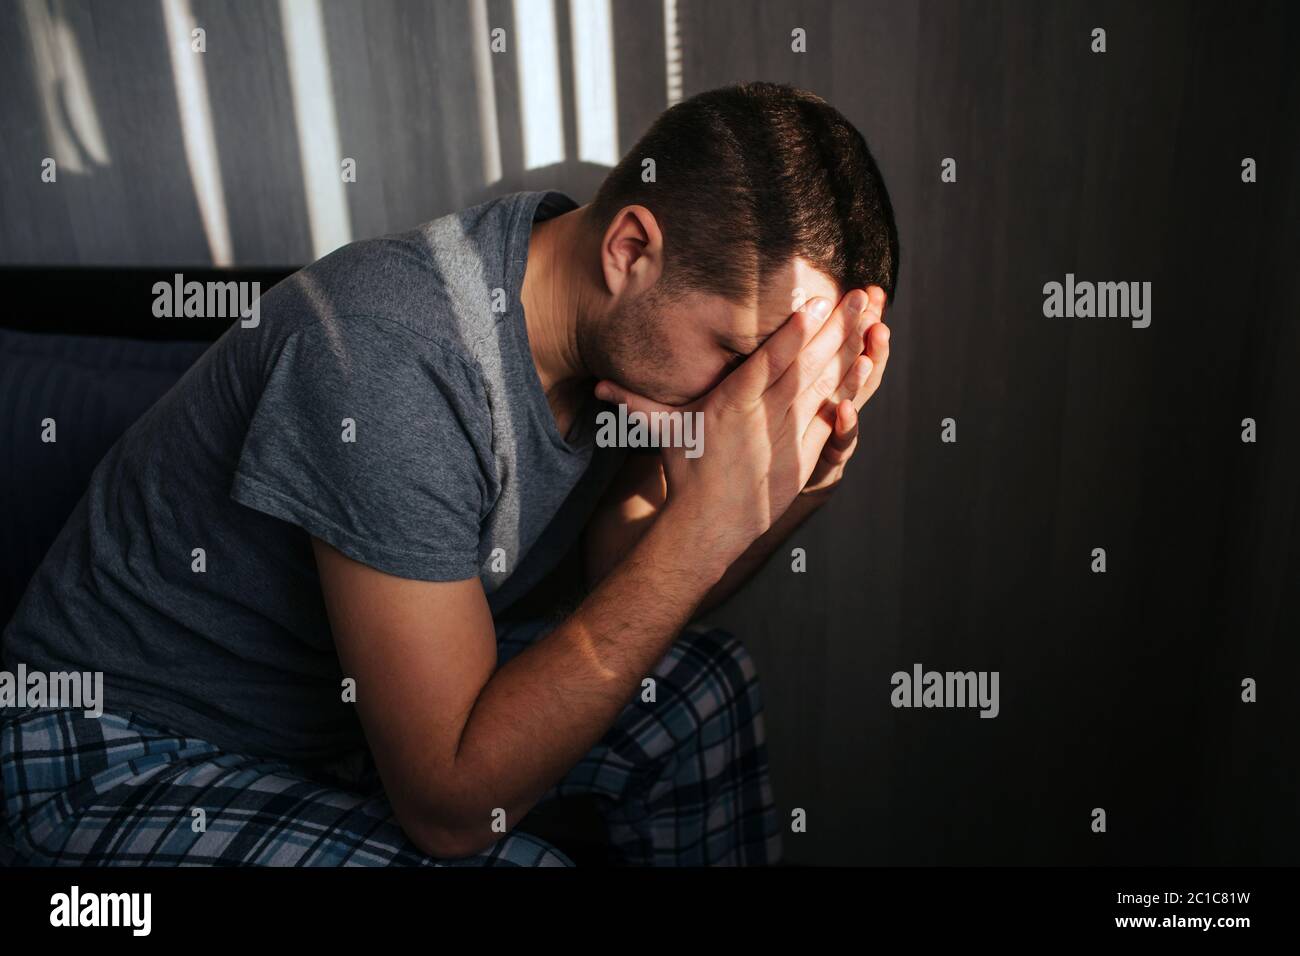 Impotence or prostatitis in a male model. Bad mood in the morning. Men's health problems. Impotence or prostatitis in a male model Stock Photo